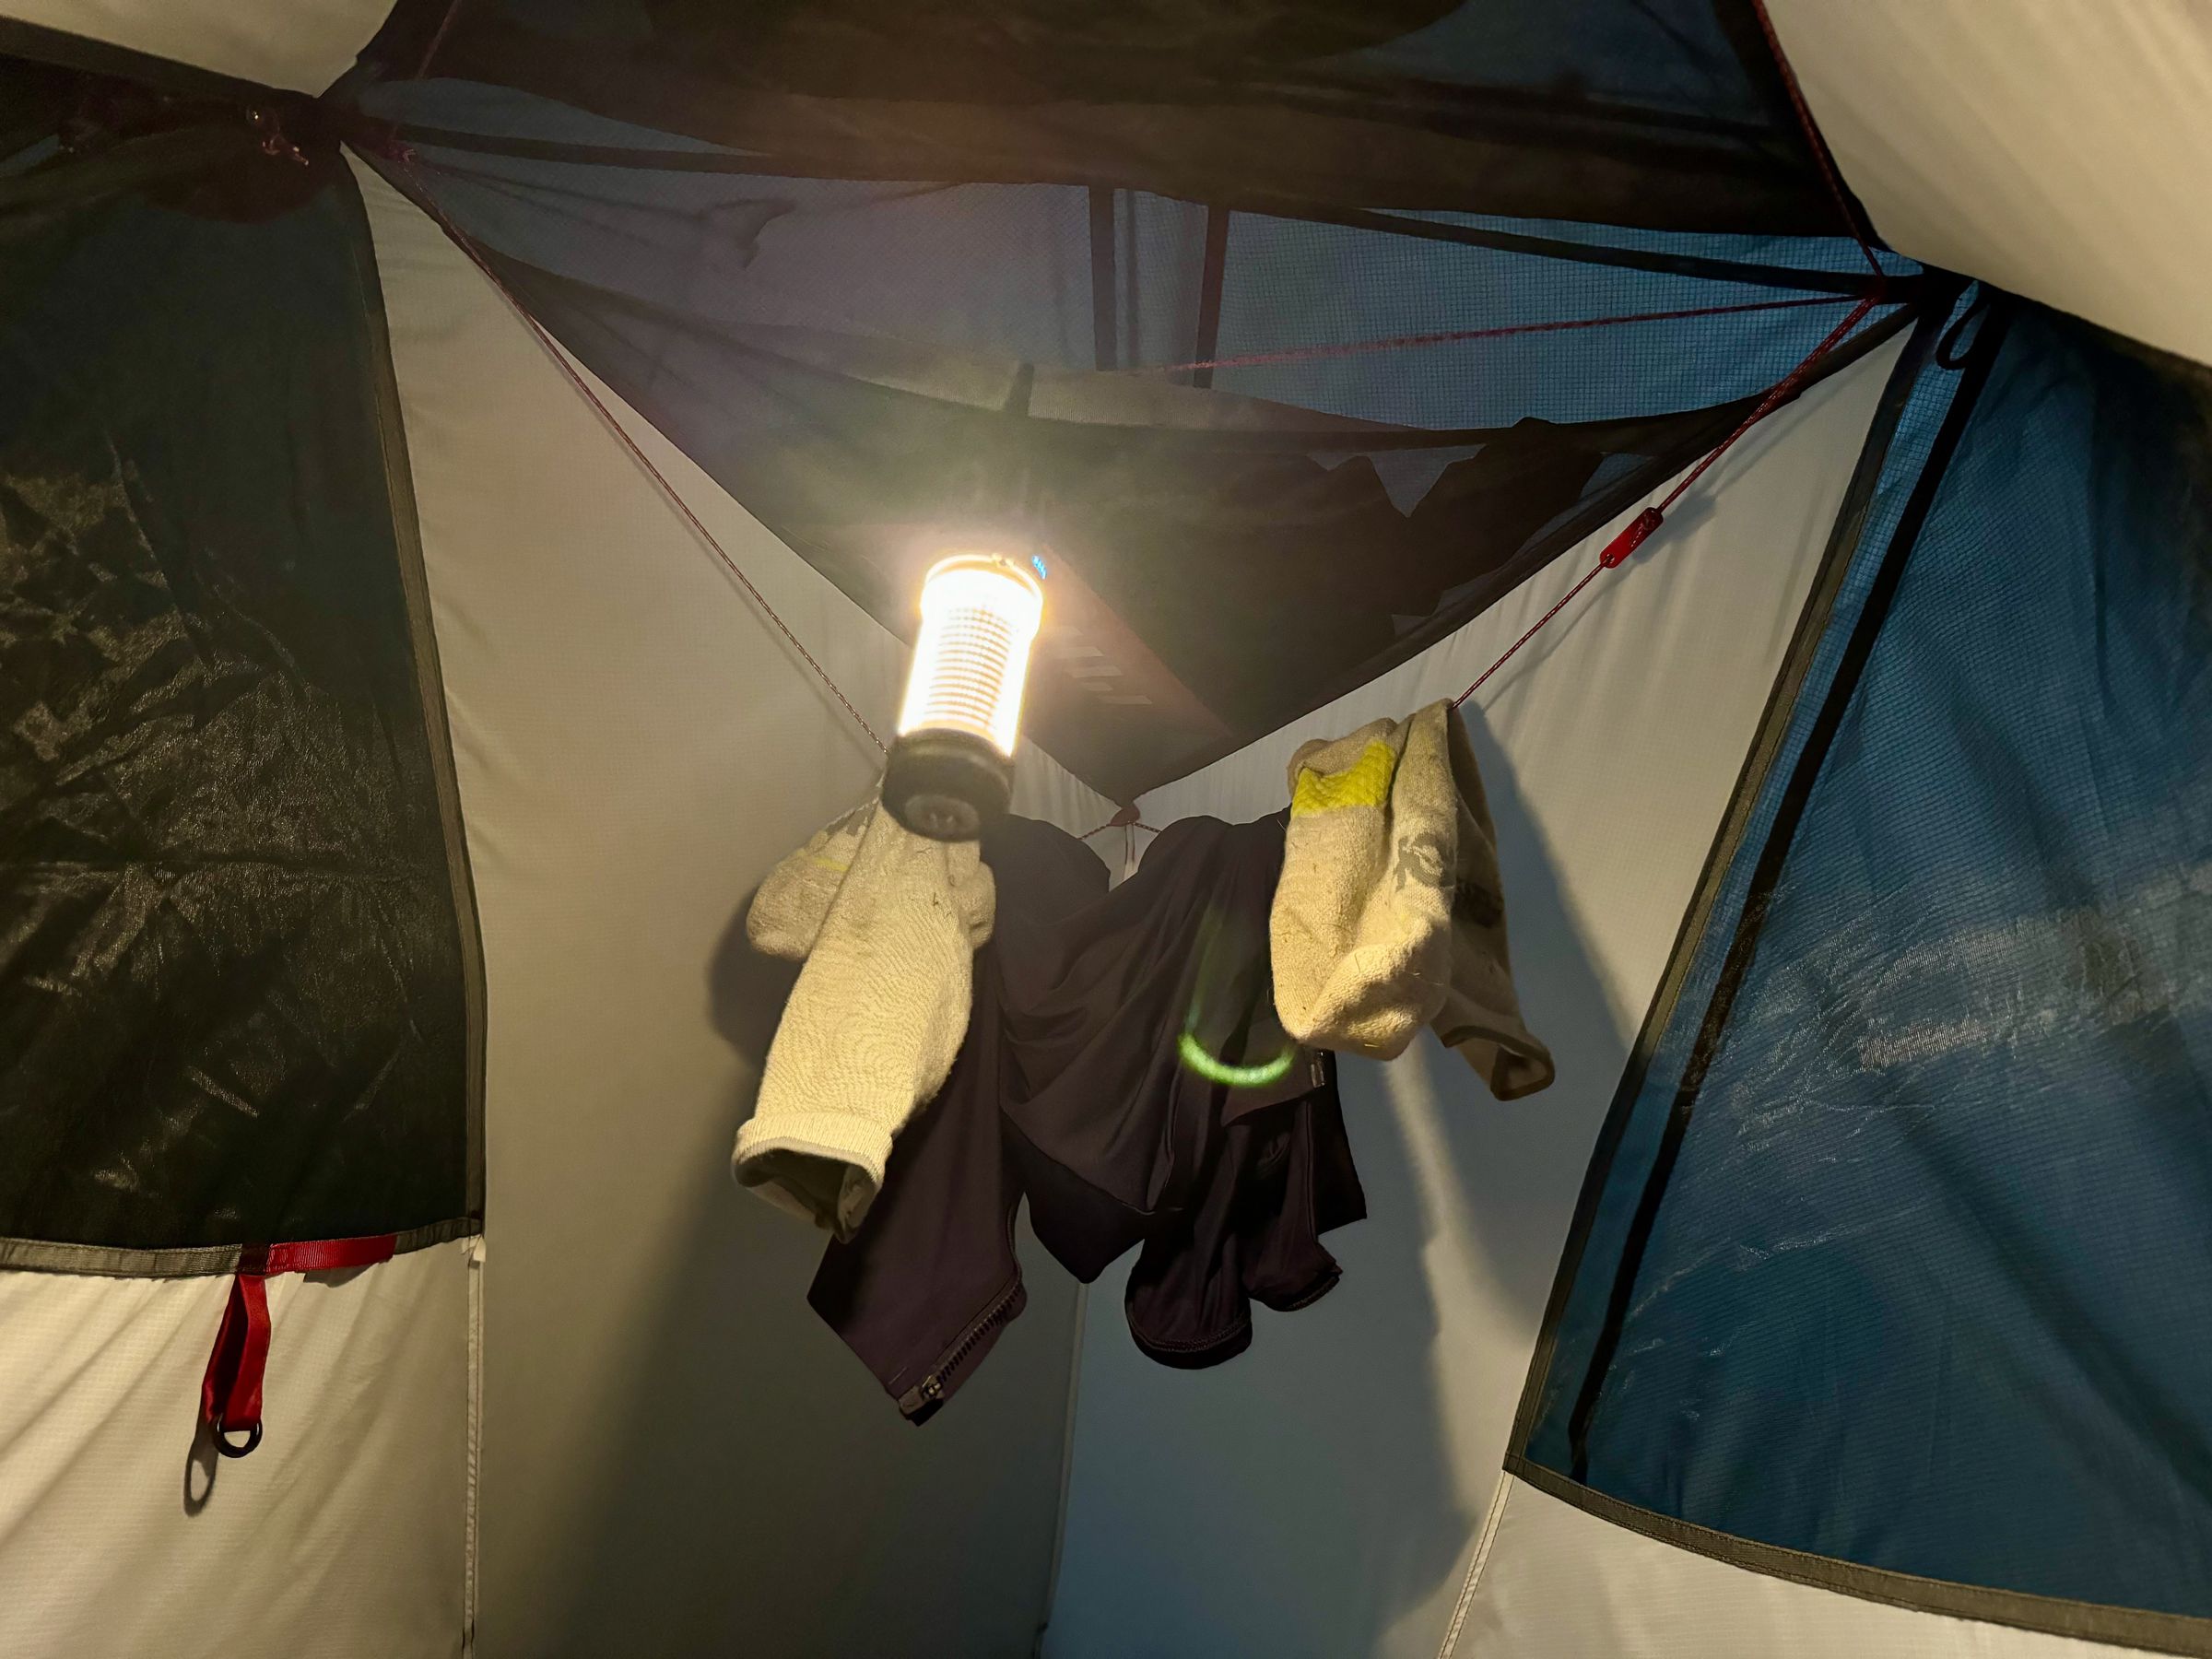 The FlexTail Tiny Repeller S kept my tent lit and free of mosquitos, but more testing is required.